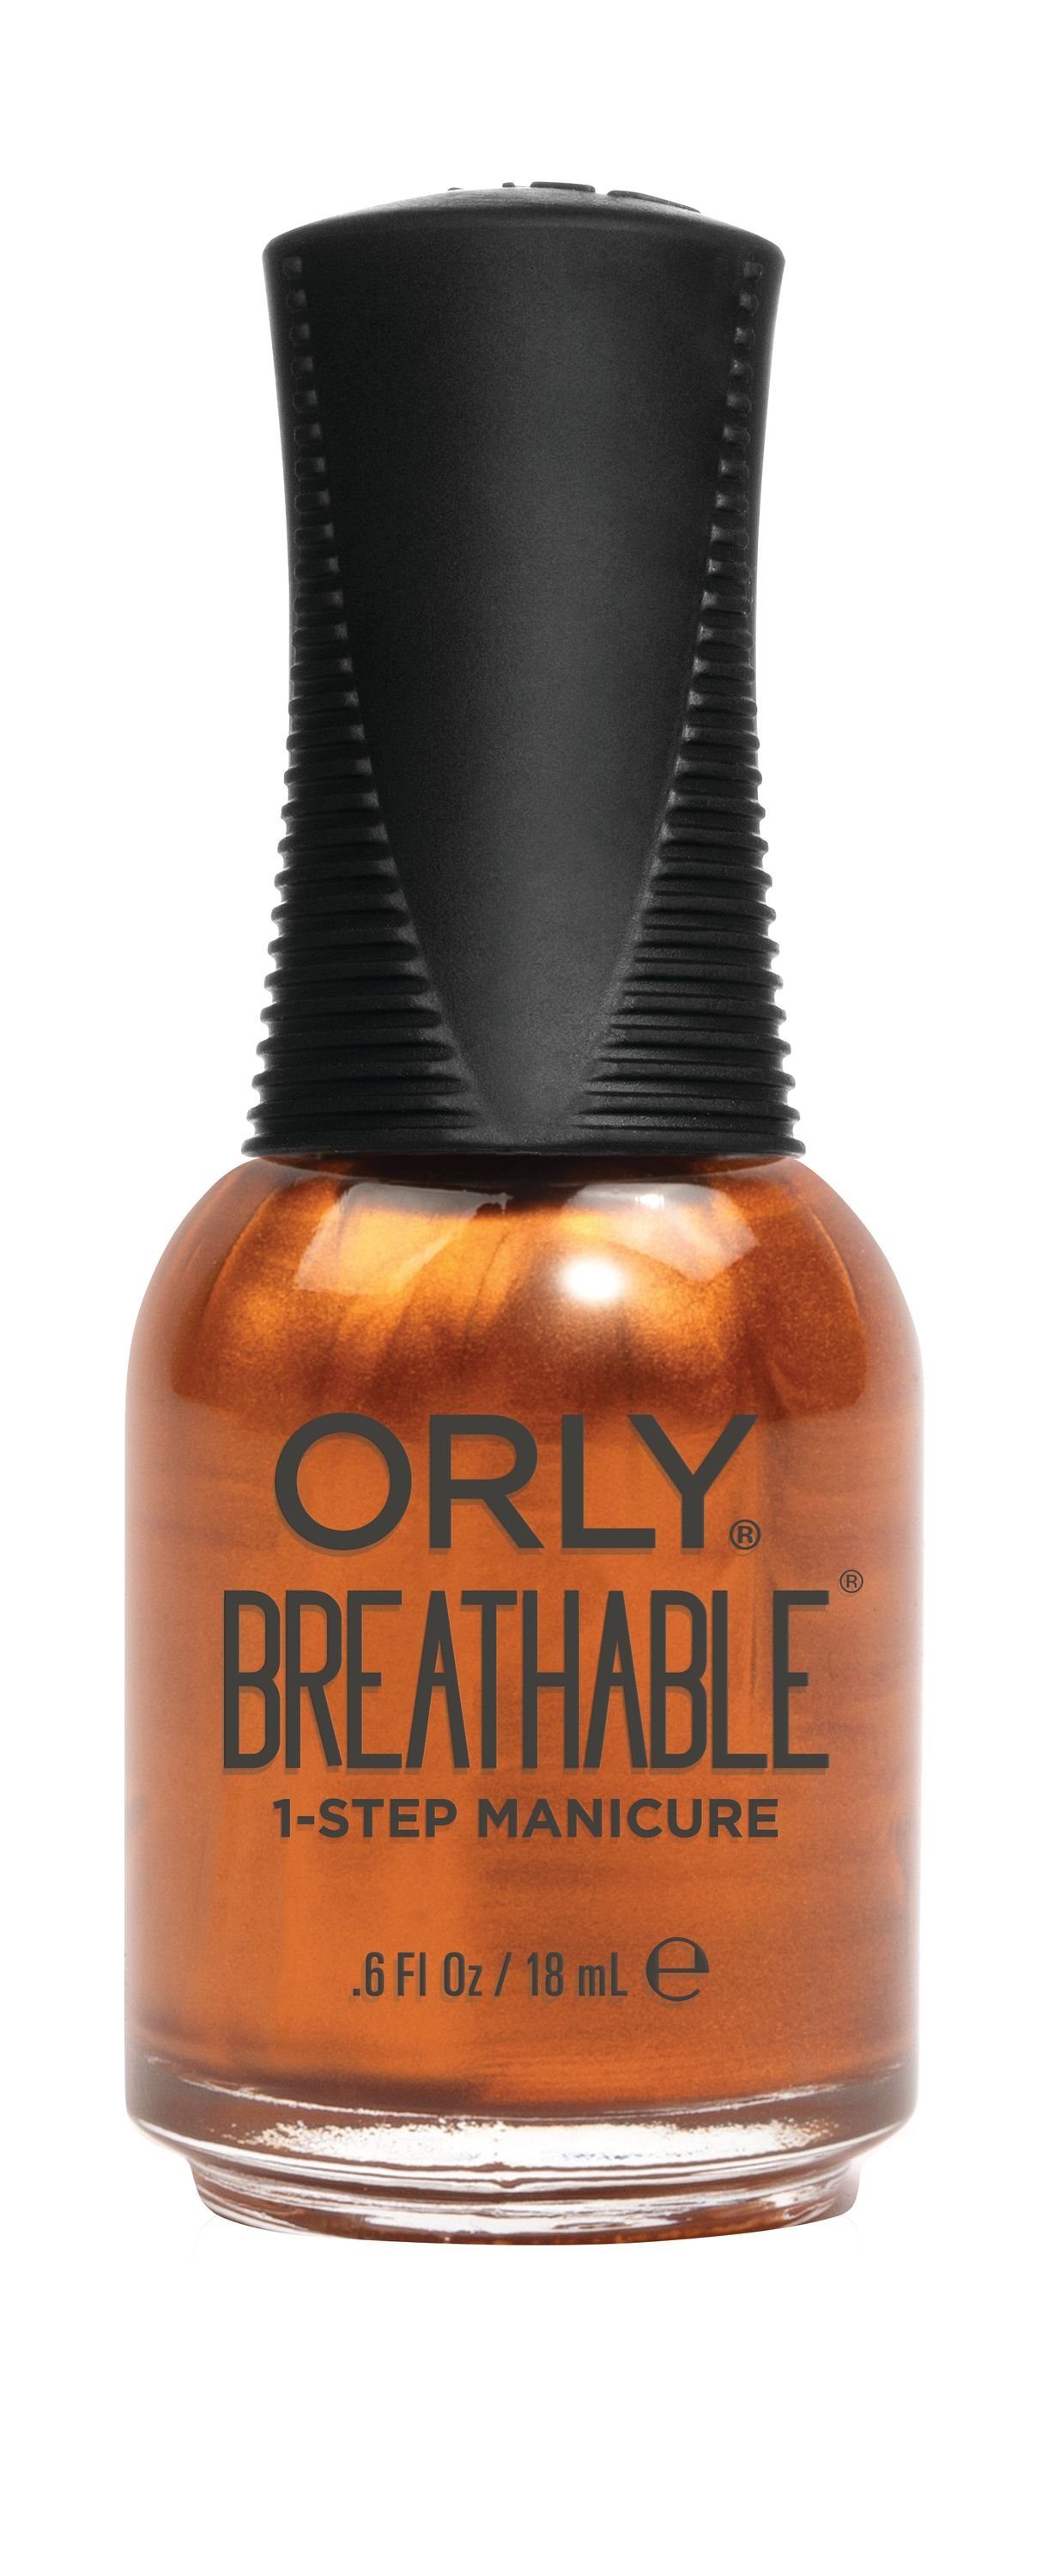 ORLY Breathable Nagellack Light ML ORLY 18 (Camp)Fire, My